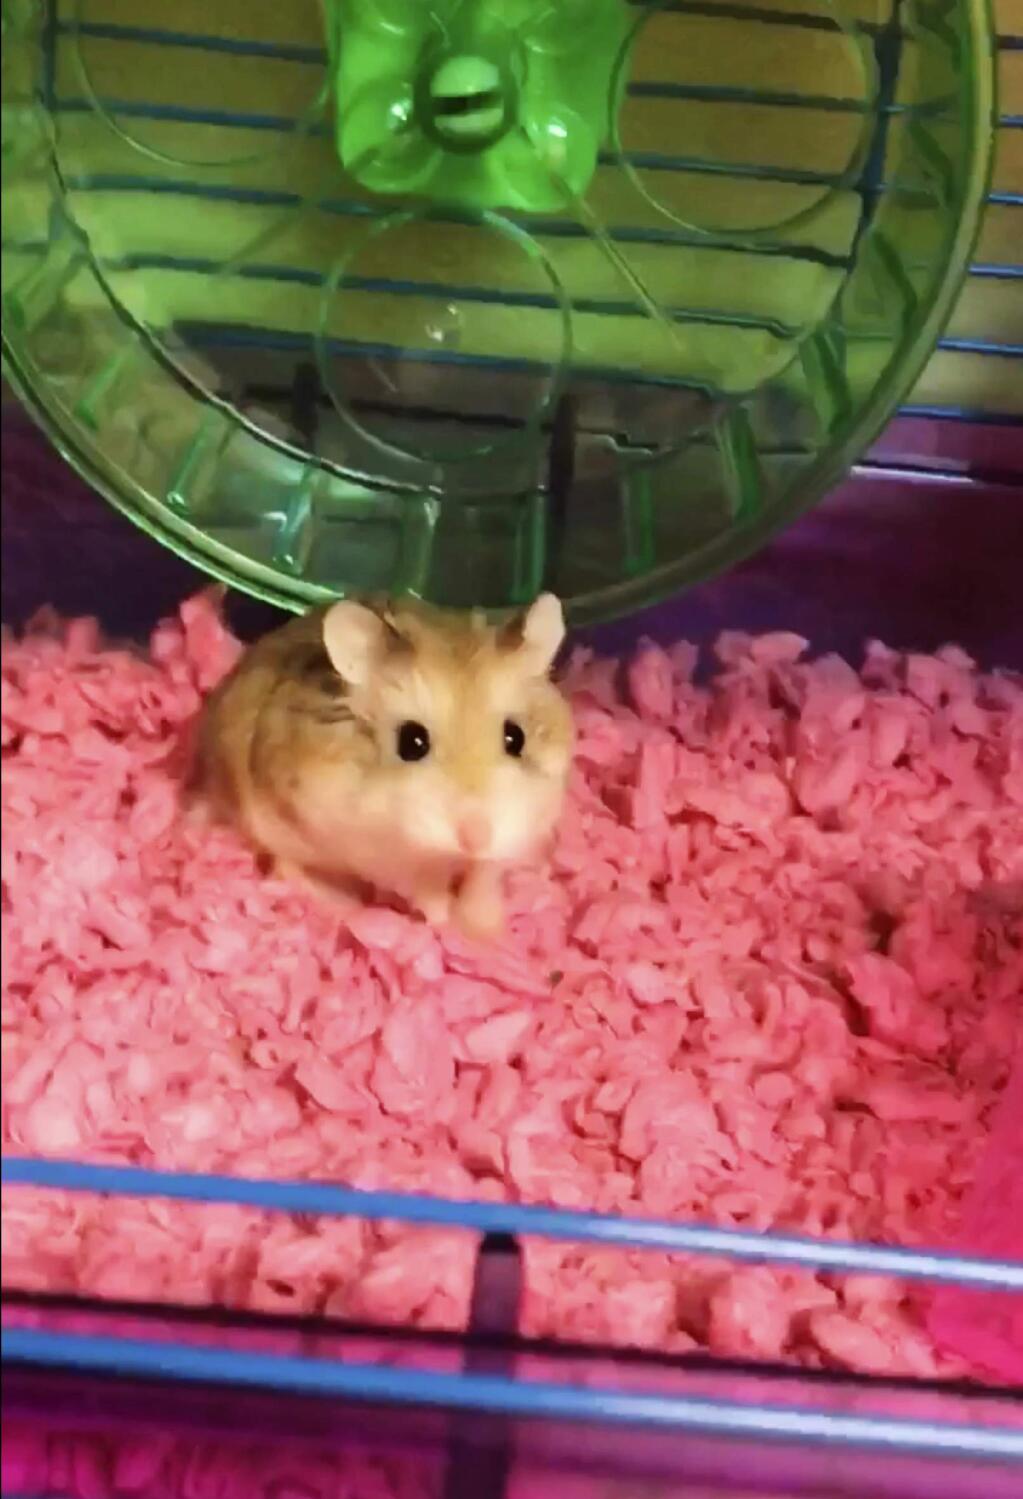 This undated image made from video provided by Belen Aldecosea shows Pebbles, her pet dwarf hamster. Aldecosea says Spirit Airlines told her to flush her hamster down an airport toilet because the emotional support rodent wasn't allowed to fly with her. The 21-year-old told the Miami Herald she flushed Pebbles at an airline employee's suggestion, after running out of other options. A spokesman for Spirit acknowledged the airline mistakenly told Aldecosea that Pebbles was allowed. But he denied that a Spirit employee recommended flushing her pet in an airport restroom. (Belen Aldecosea via AP)